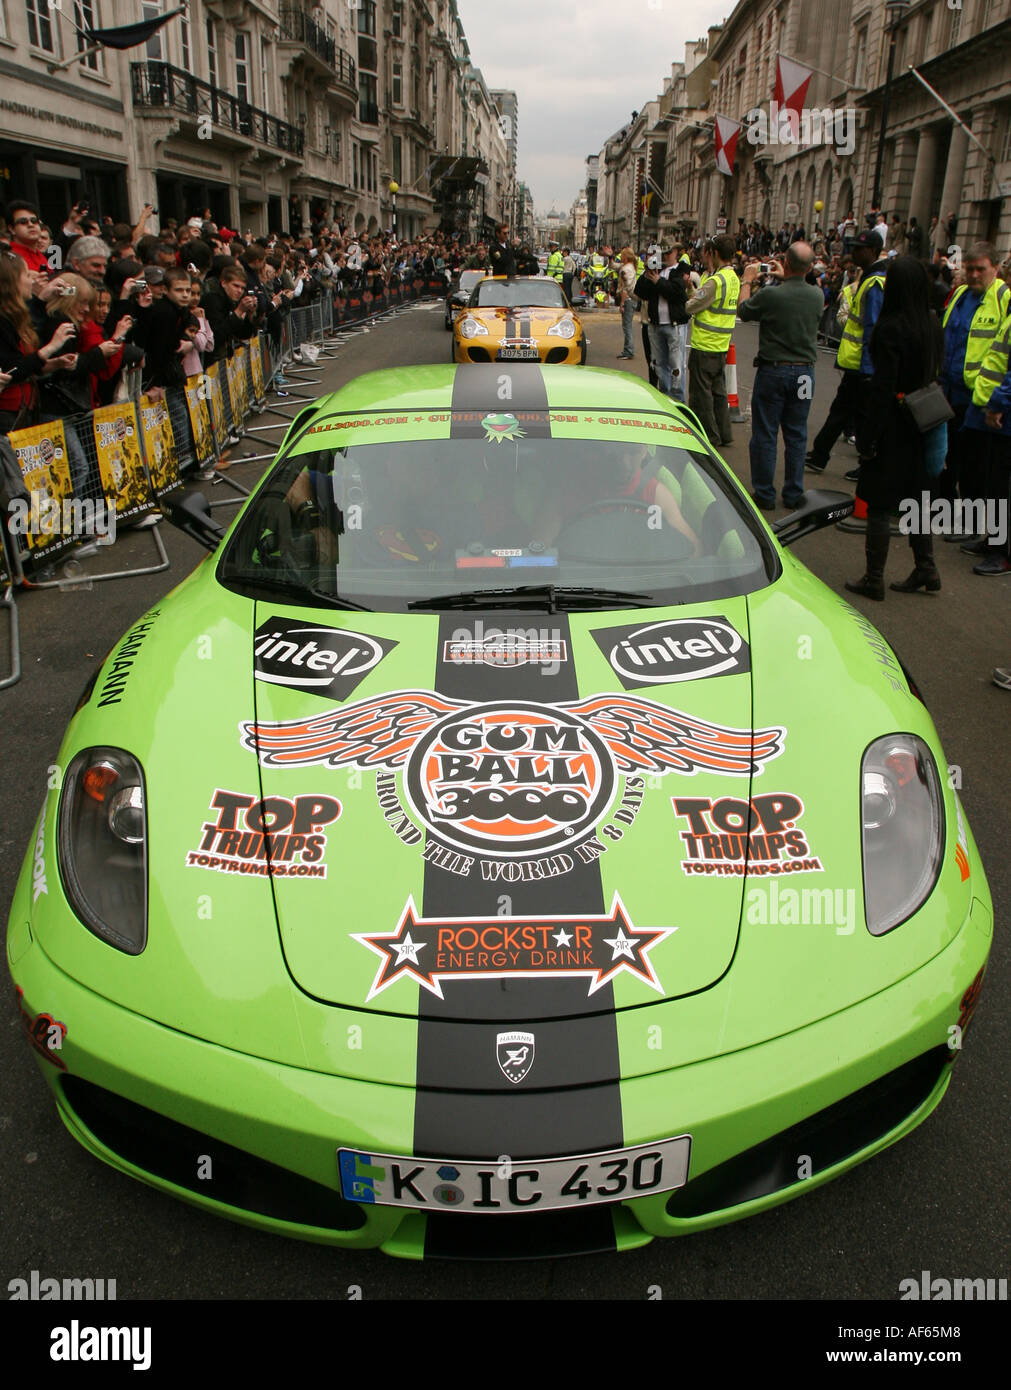 Start of the car race Gumball 3000 in central London, 30 April 2006 Stock Photo